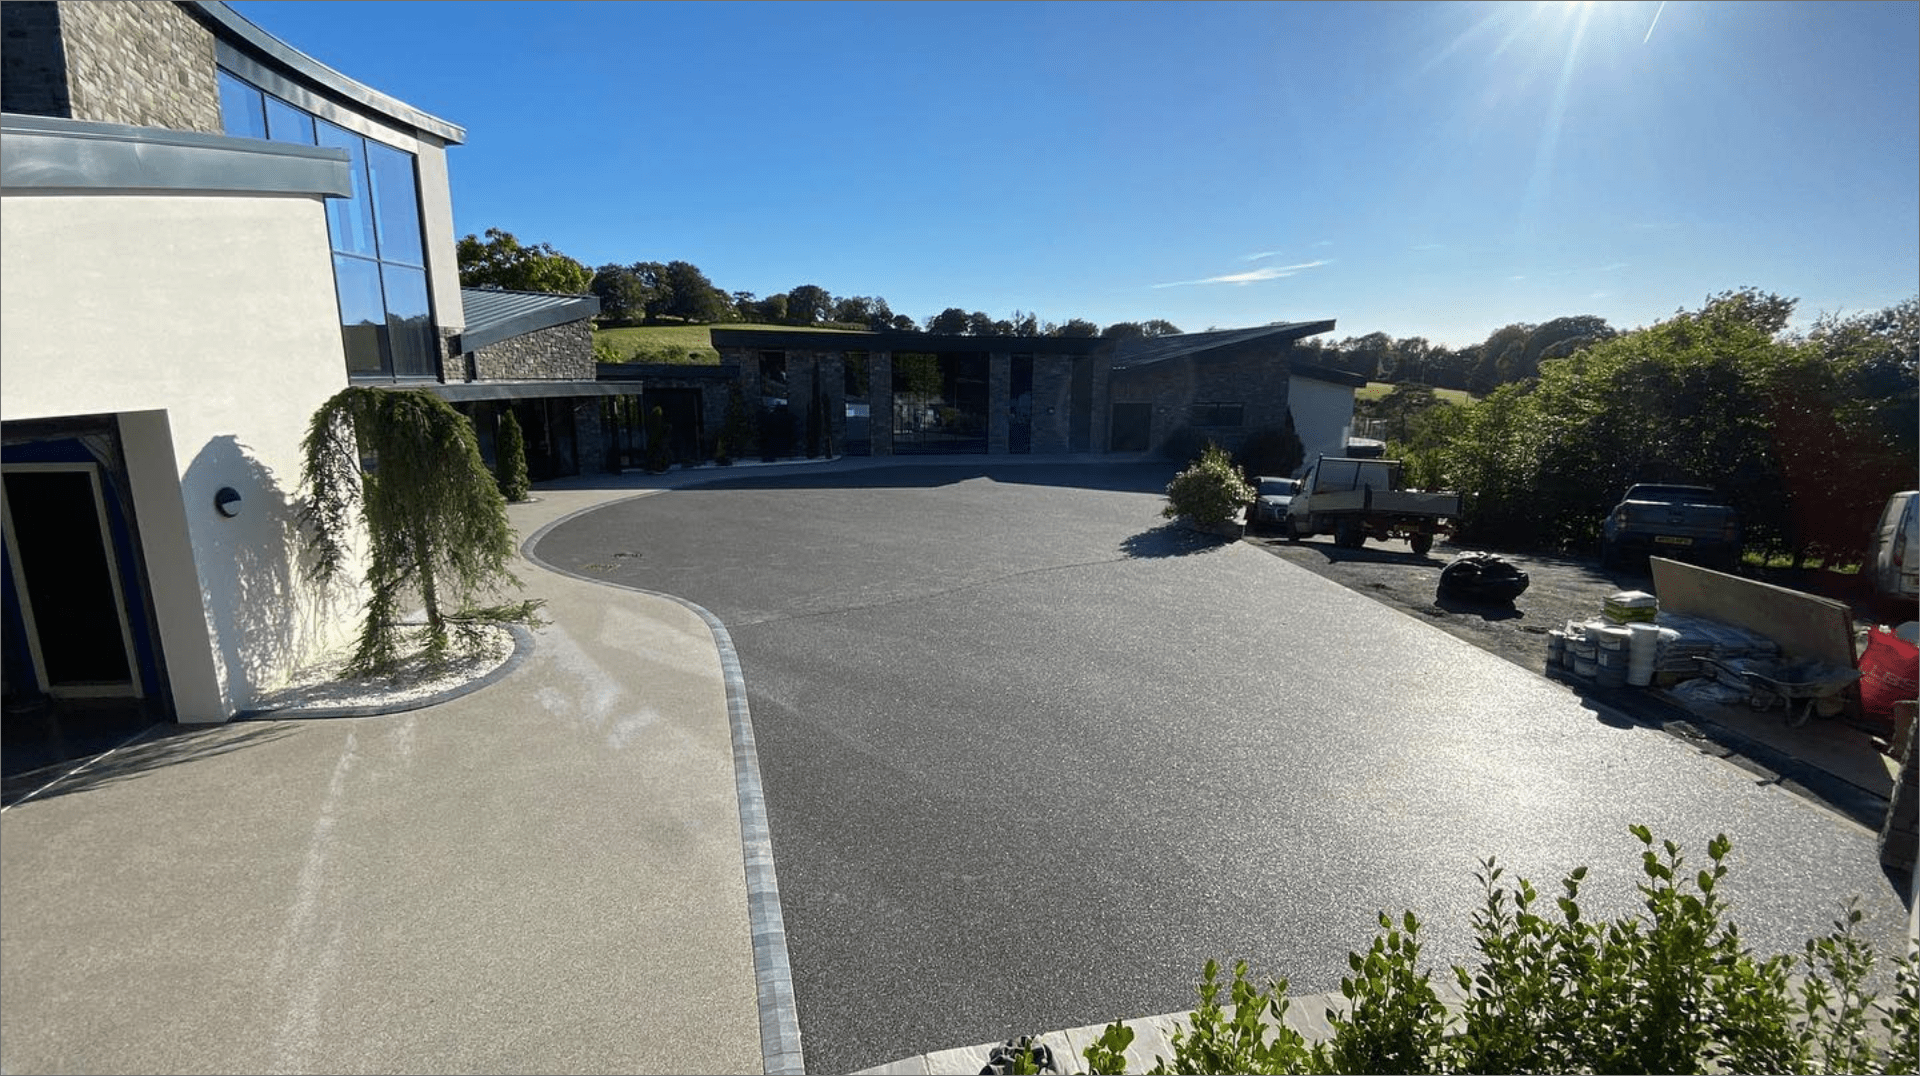 Large resin driveway outside house, clear blue sky